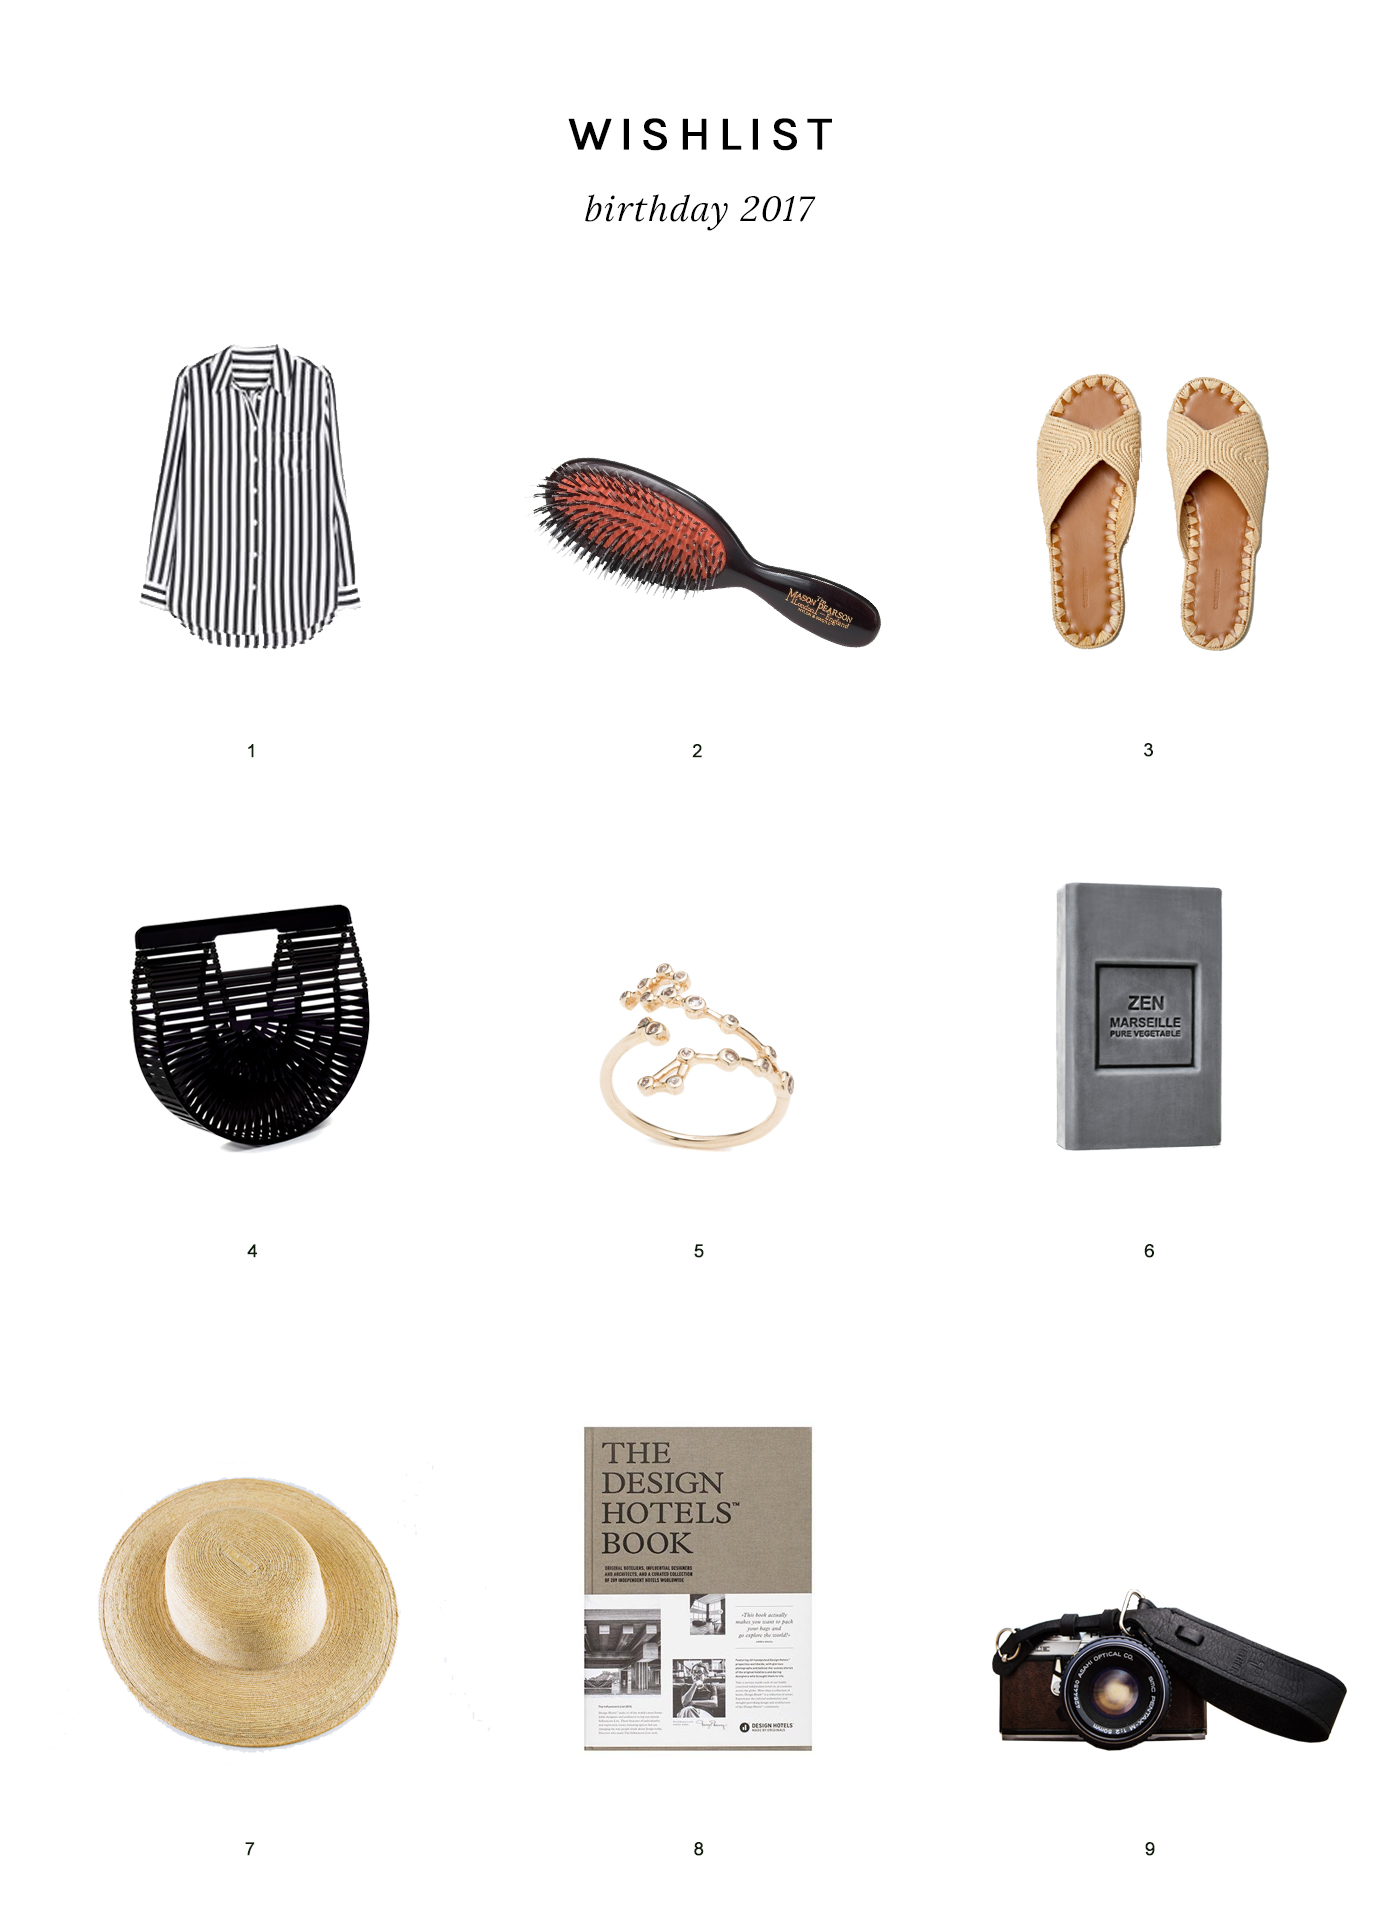 My Birthday 2017 wishlist, featuring Everlane, Mason Pearson, Carrie Forbes, Cult Gaia, Lulu Frost, MyHappySoaps, Nona Vintage, Design Hotels, Tether Straps.